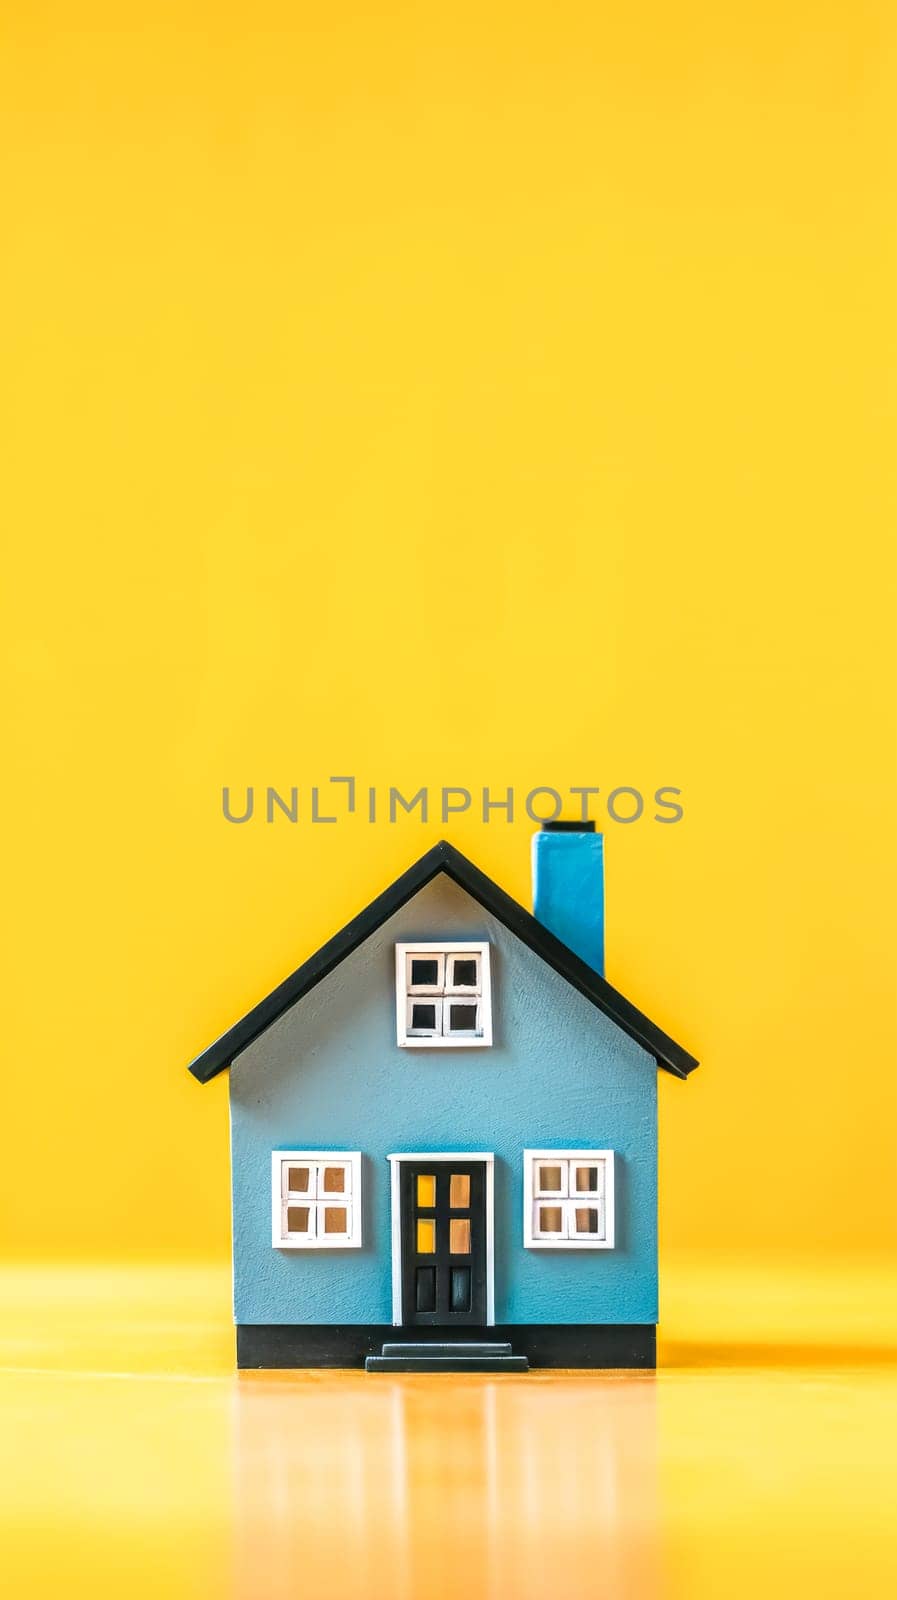 miniature house with a blue facade and a bright blue chimney, set against a vibrant yellow background, evoking themes of home, comfort, and the simplicity of domestic life by Edophoto